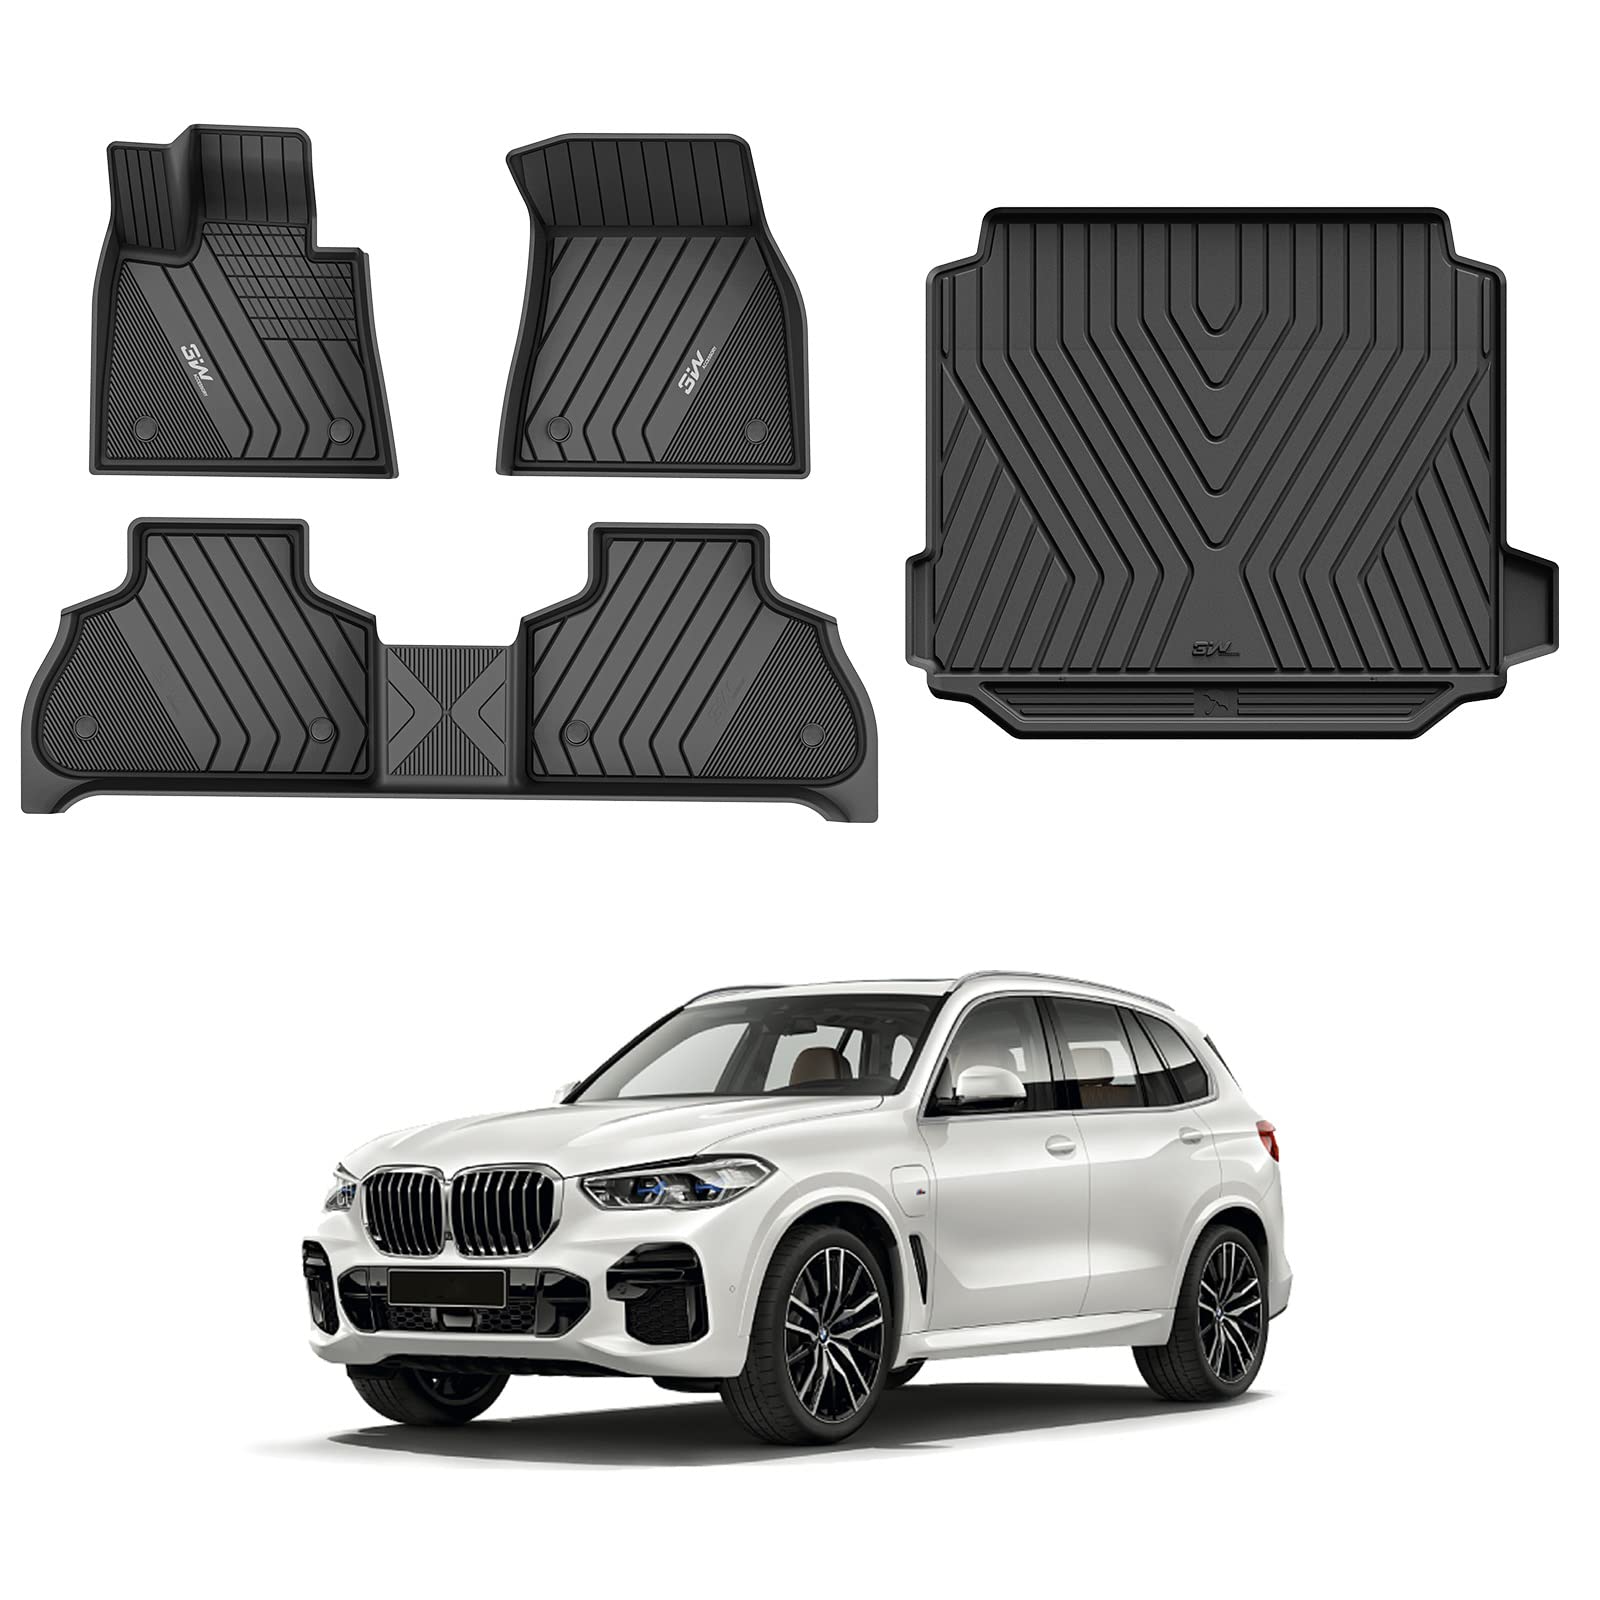 3W BMW X5 2019-2024 Custom Floor Mats / Trunk Mat TPE Material & All-Weather Protection Vehicles & Parts 3Wliners 2019-2024 X5 2019-2024 1st&2nd Row Mats+Trunk Mat